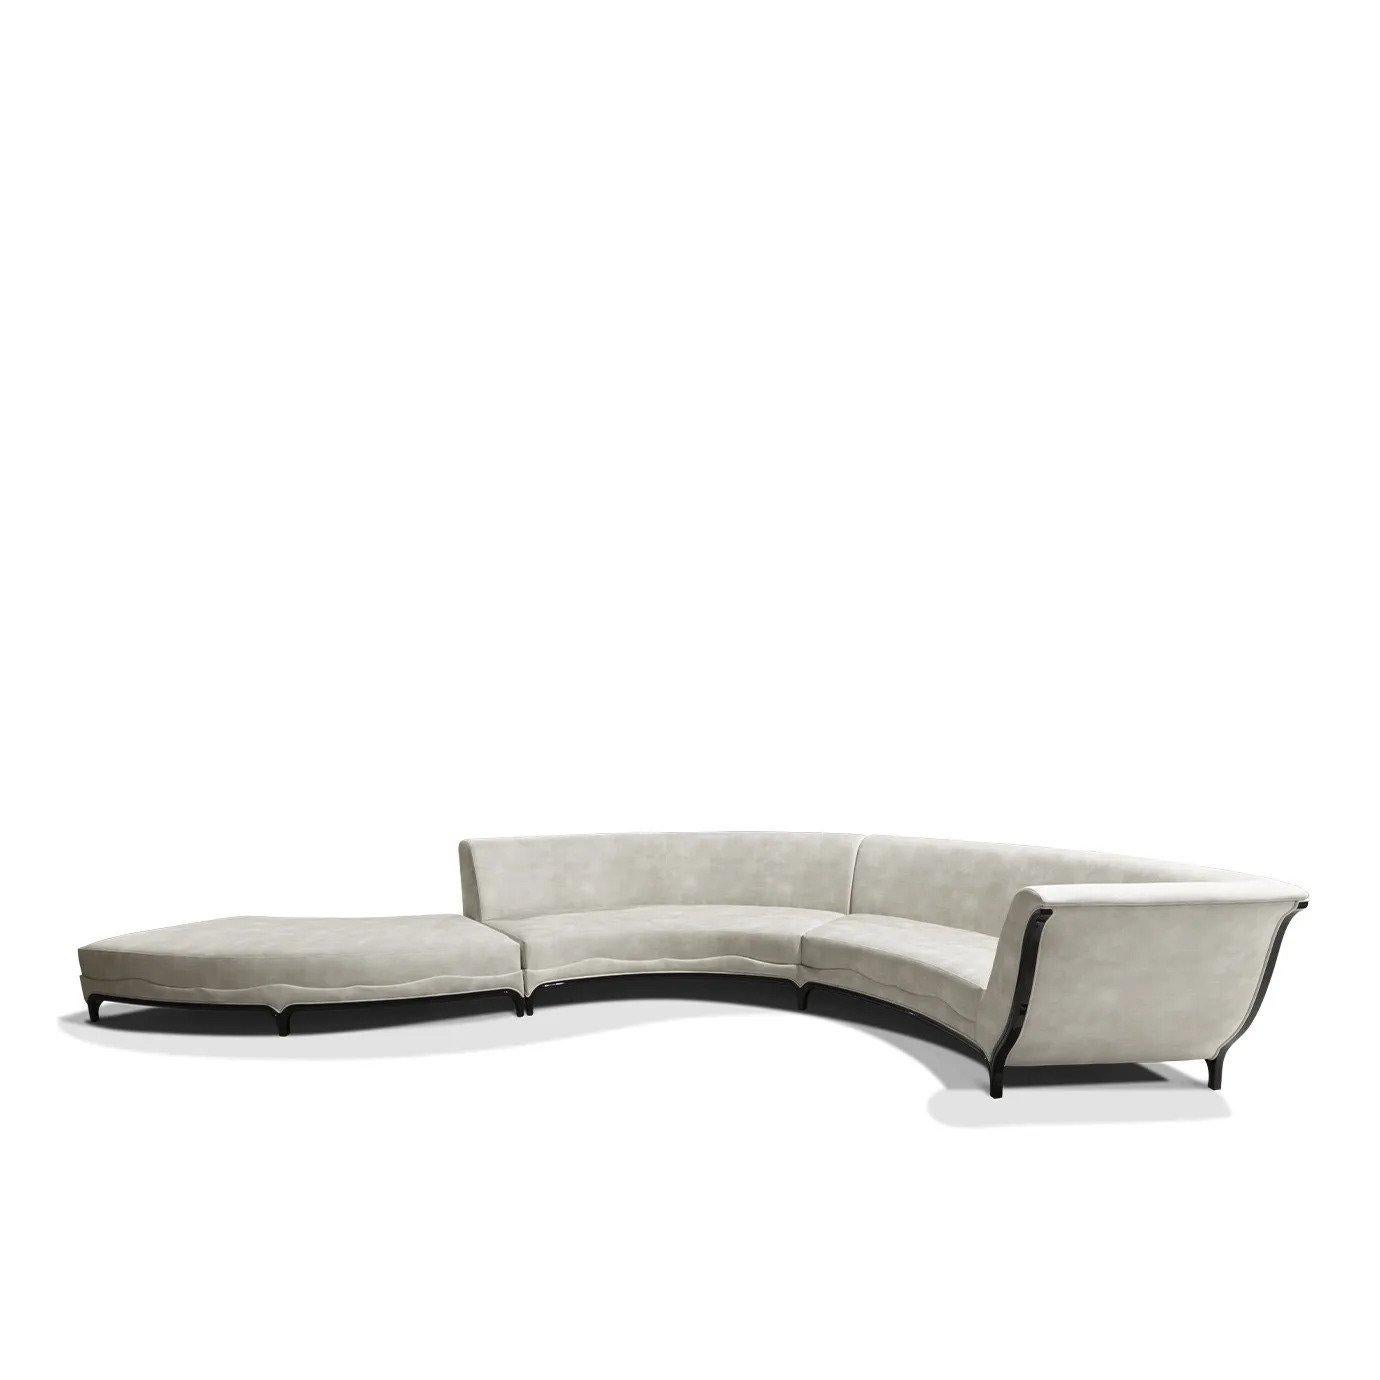 Blissful arcs curve to form the Heavenly Sofa. Defined by a hand-carved wood frame and taut upholstery, Heavenly is two pieces and can be oriented right or left. If you are looking for glorious comfort and divine style, Heavenly is ready to fill